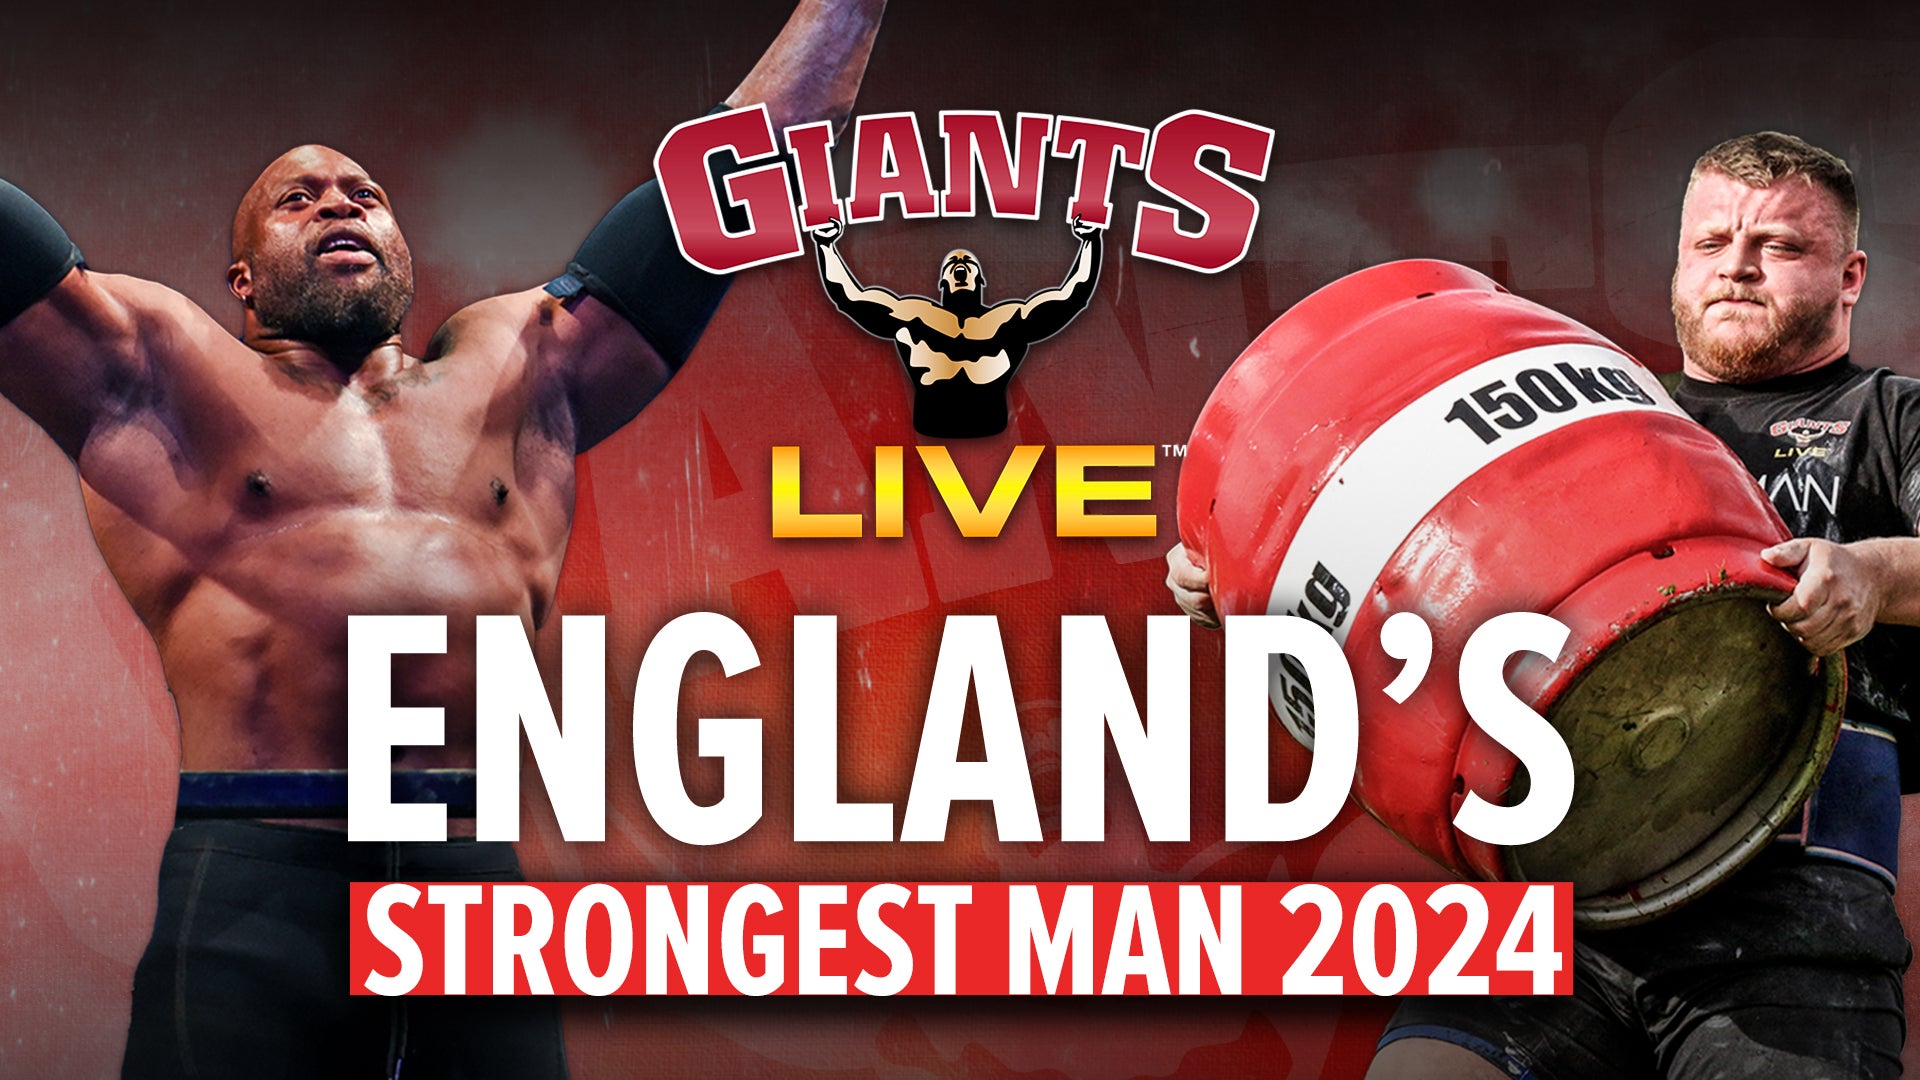 England's Strongest Man Event Title Pic